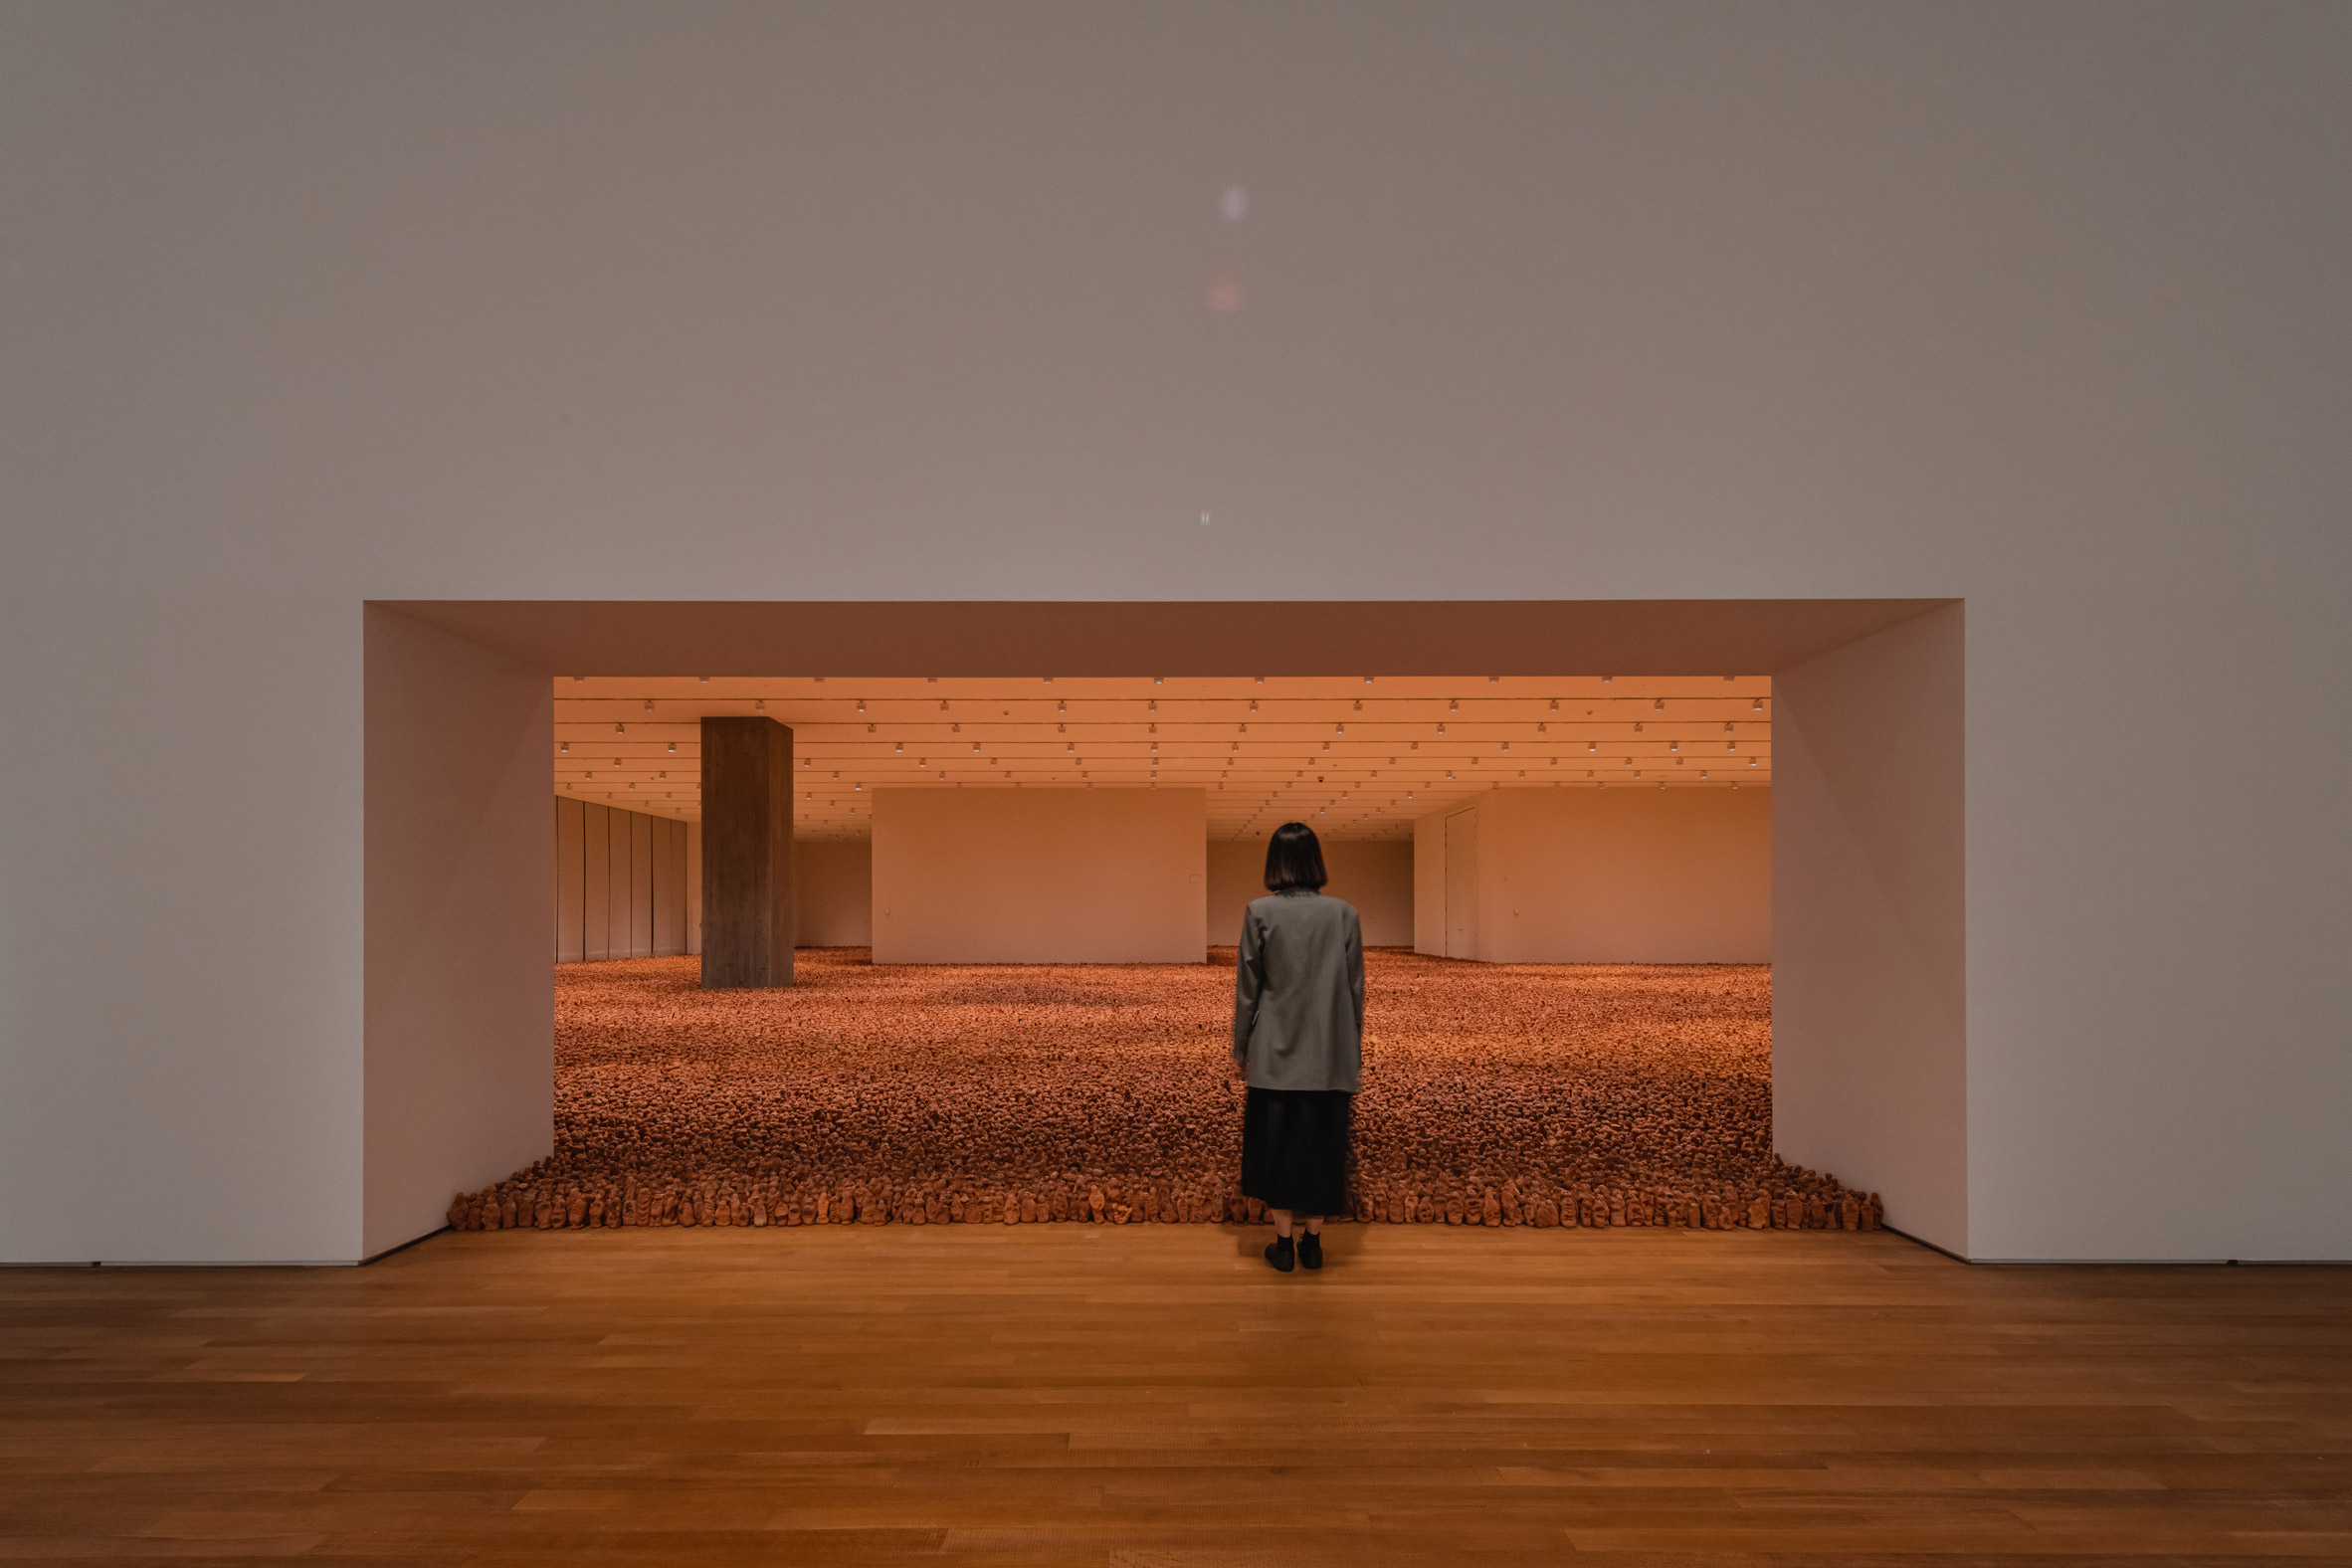 Thousands of small clay figurines stare outwards from a large white gallery space towards one watchful visitor